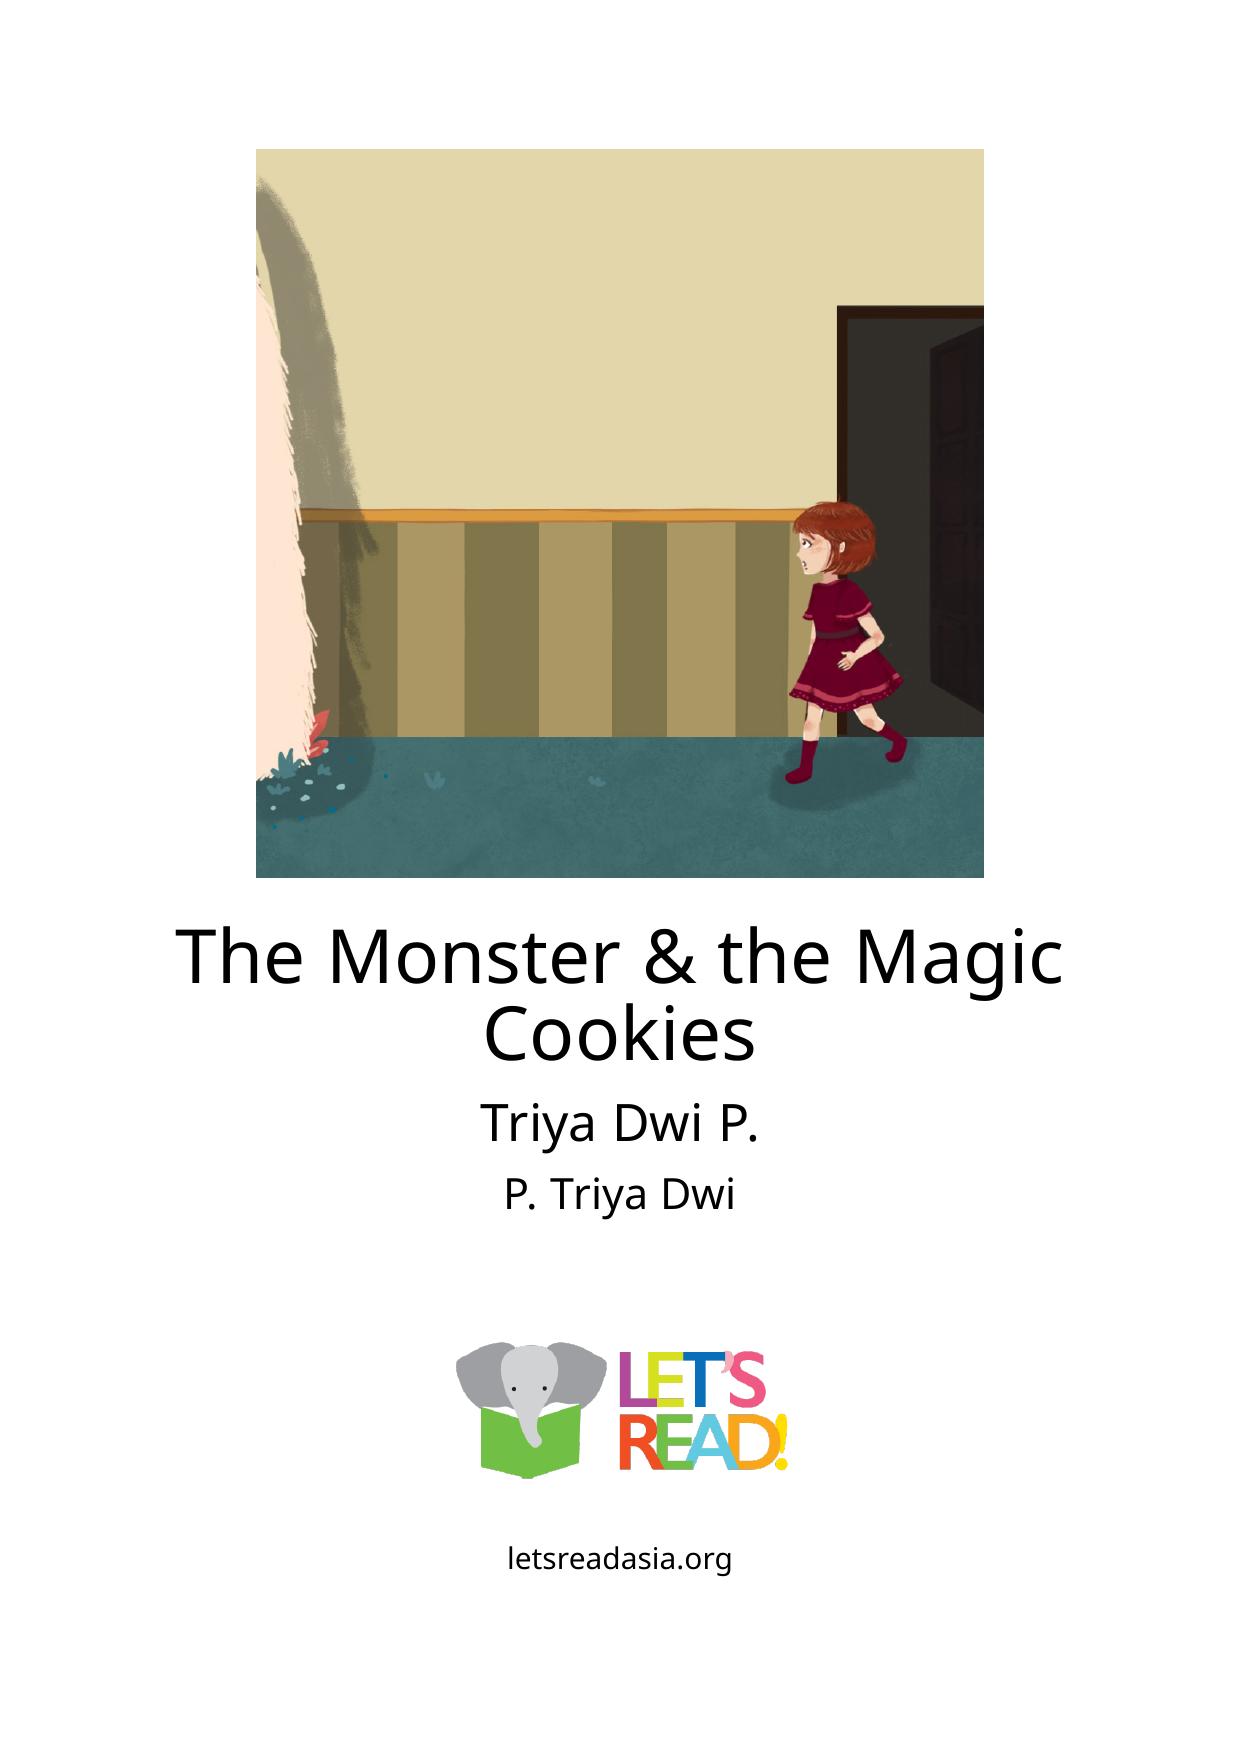 The Monster & the Magic Cookies